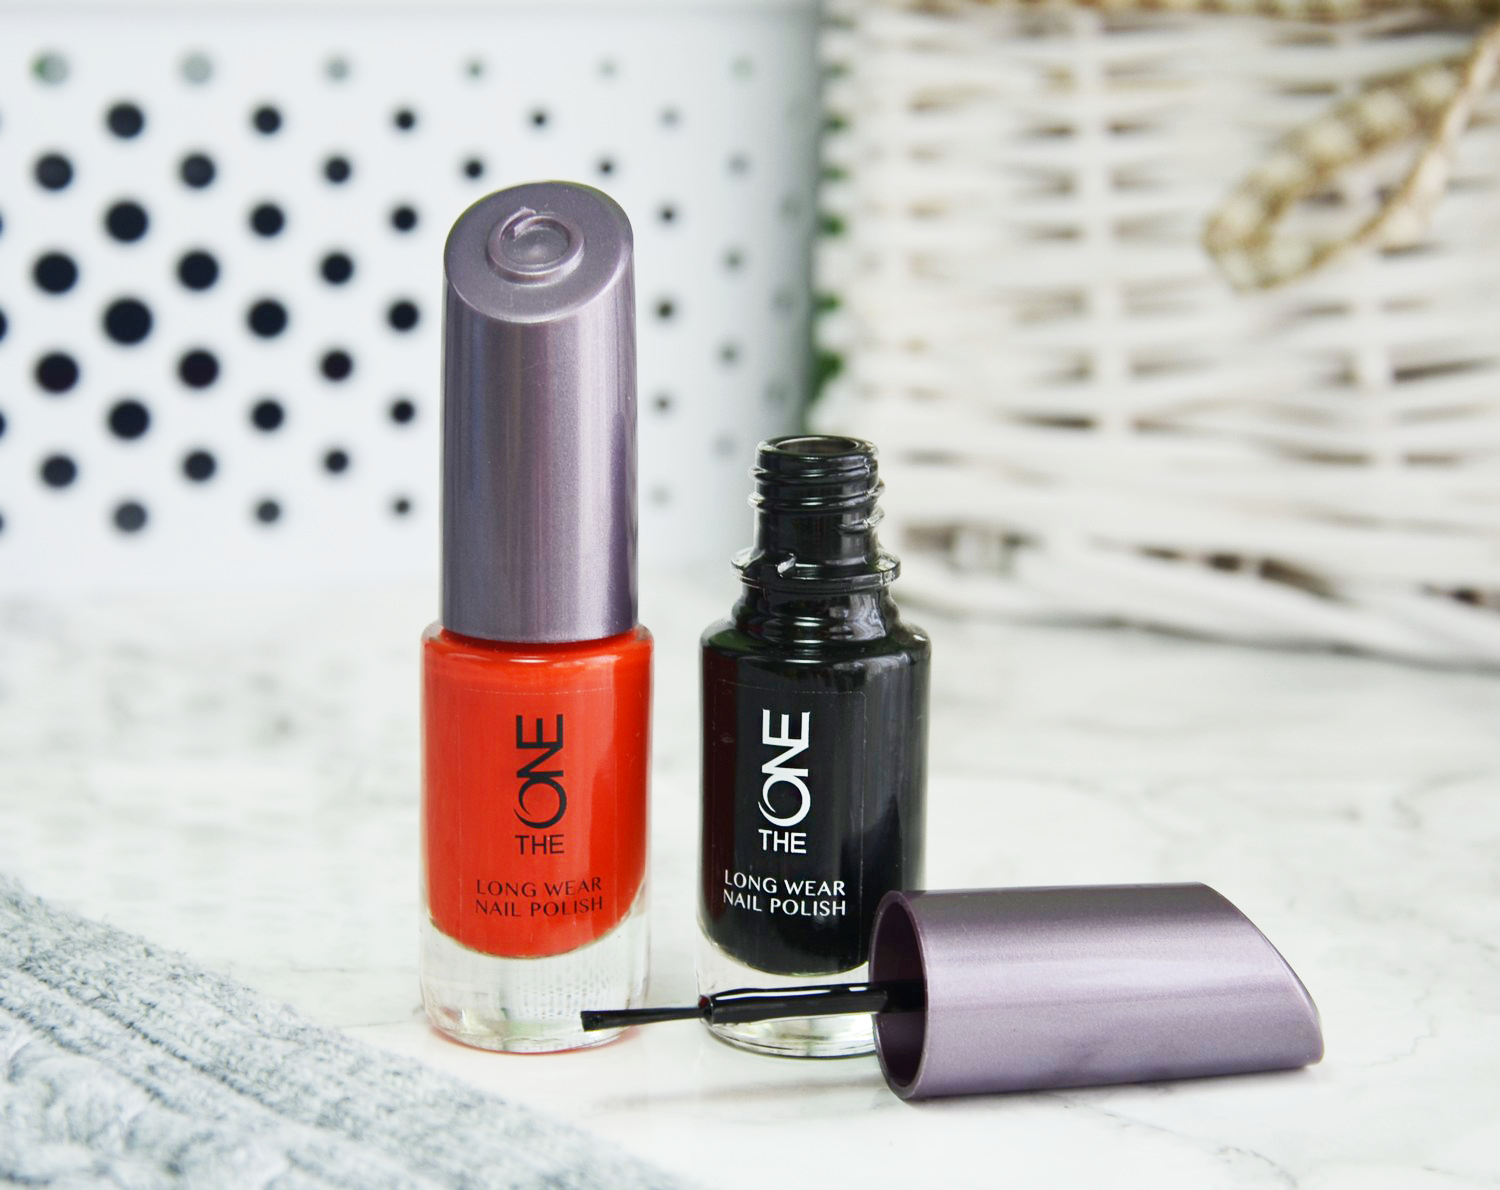 Oriflame The One Long Wear Nail Polish In Orange Spectre And Black Trick Lana Talks